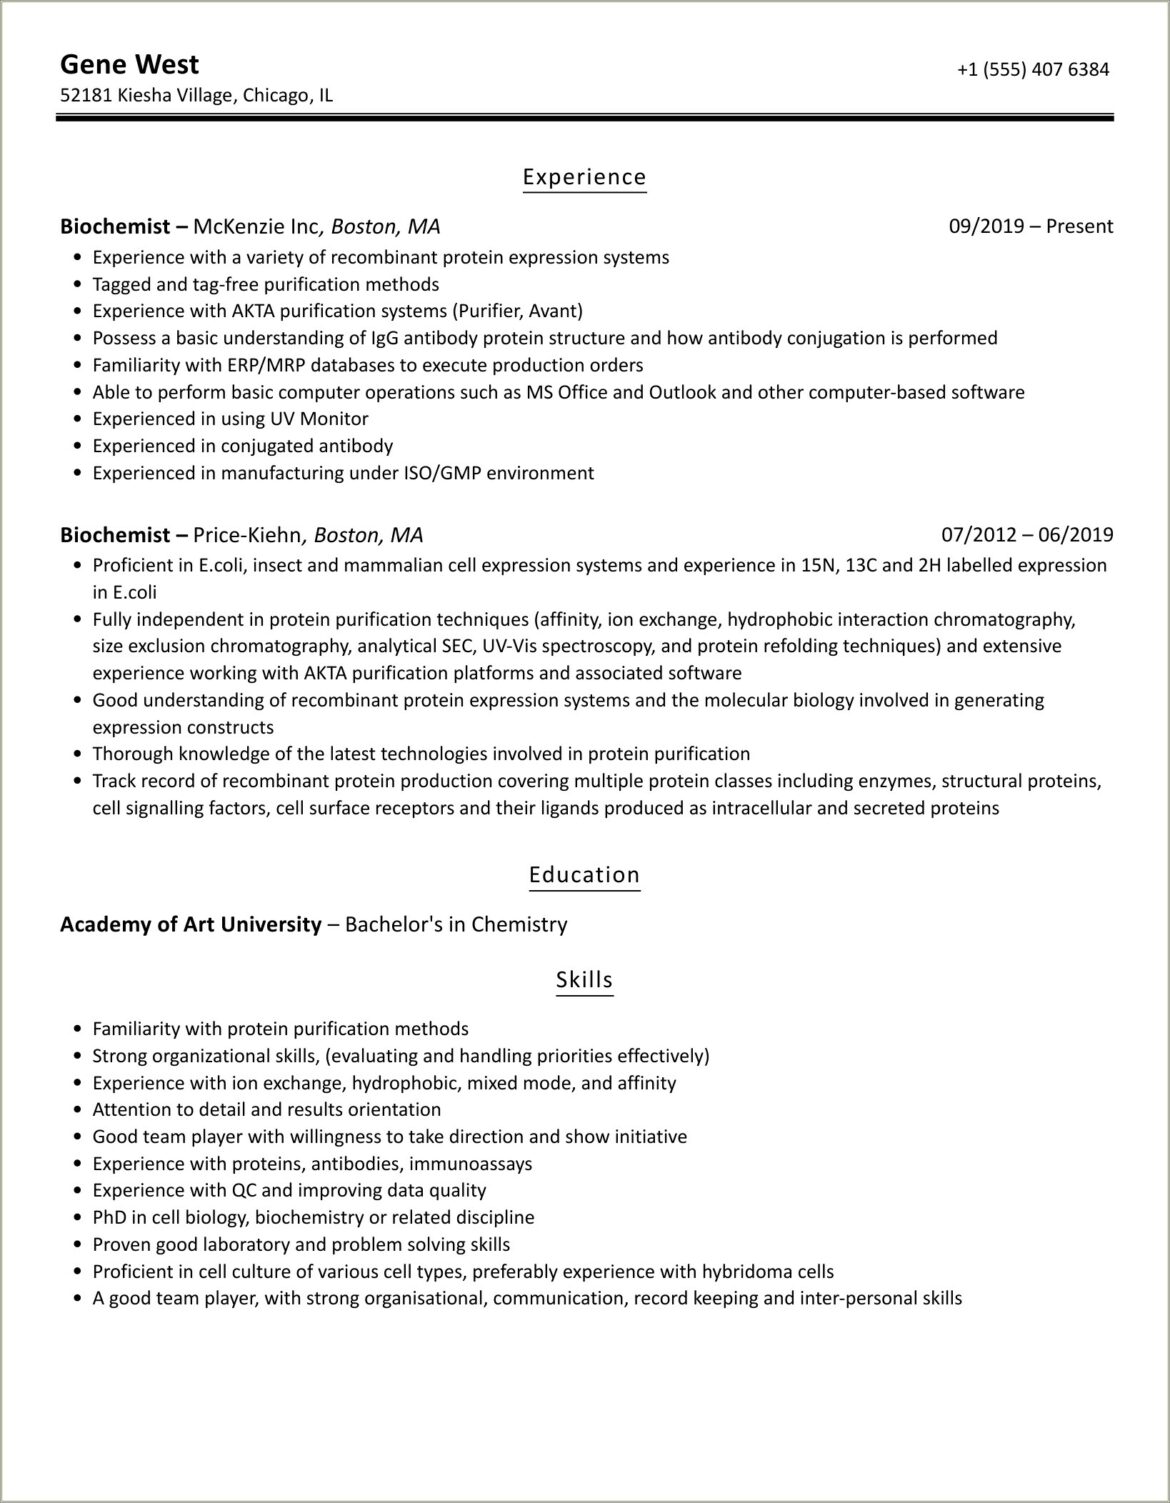 Sample Resumes For Entry Level Biochemists